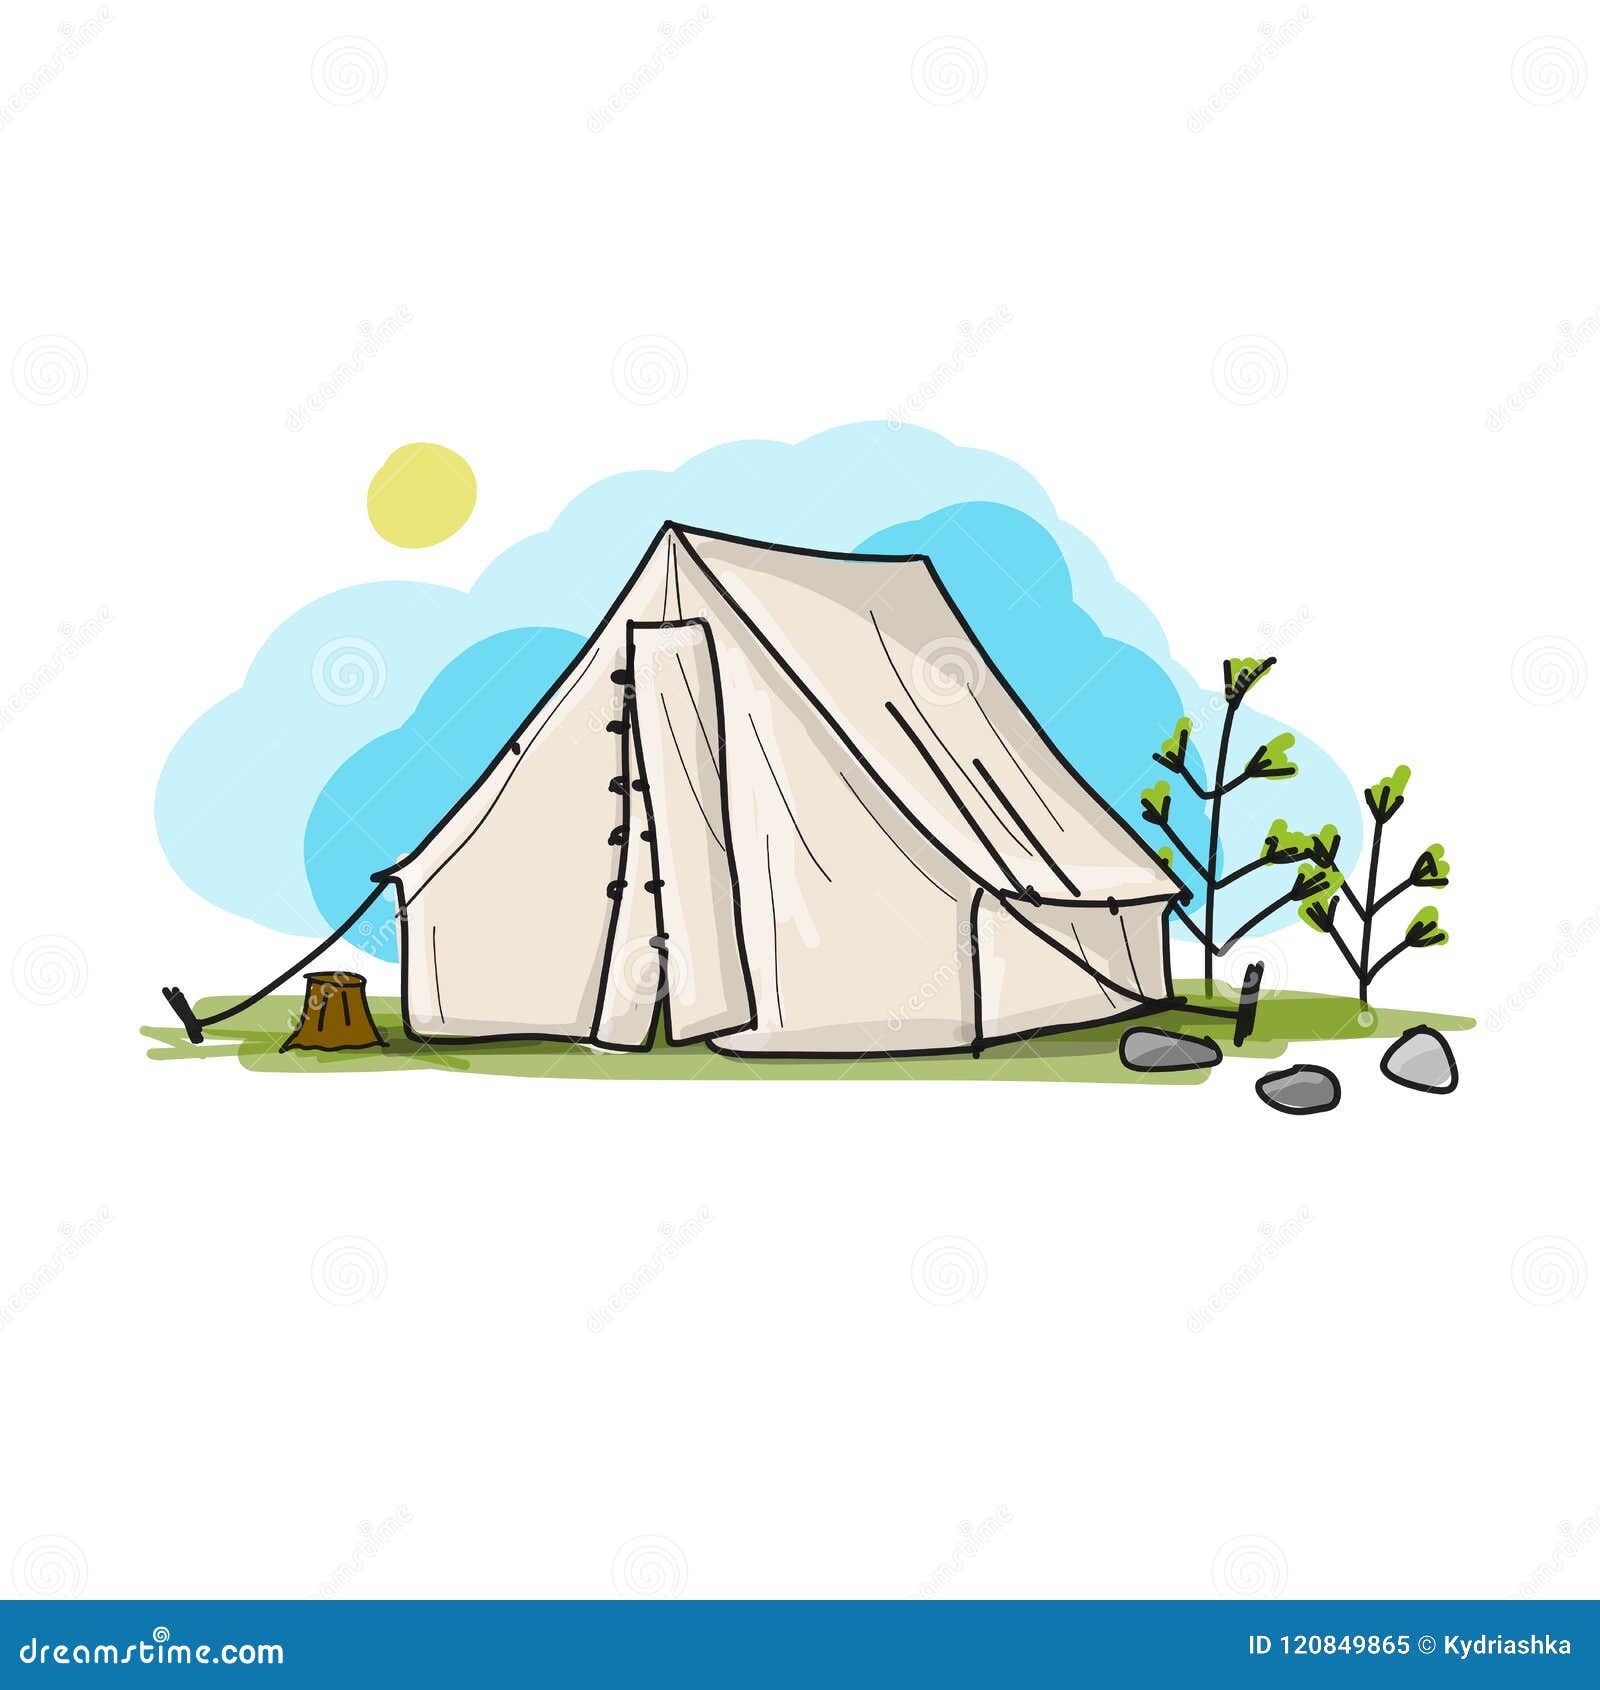 How To Draw A Tent Step by Step  6 Easy Phase